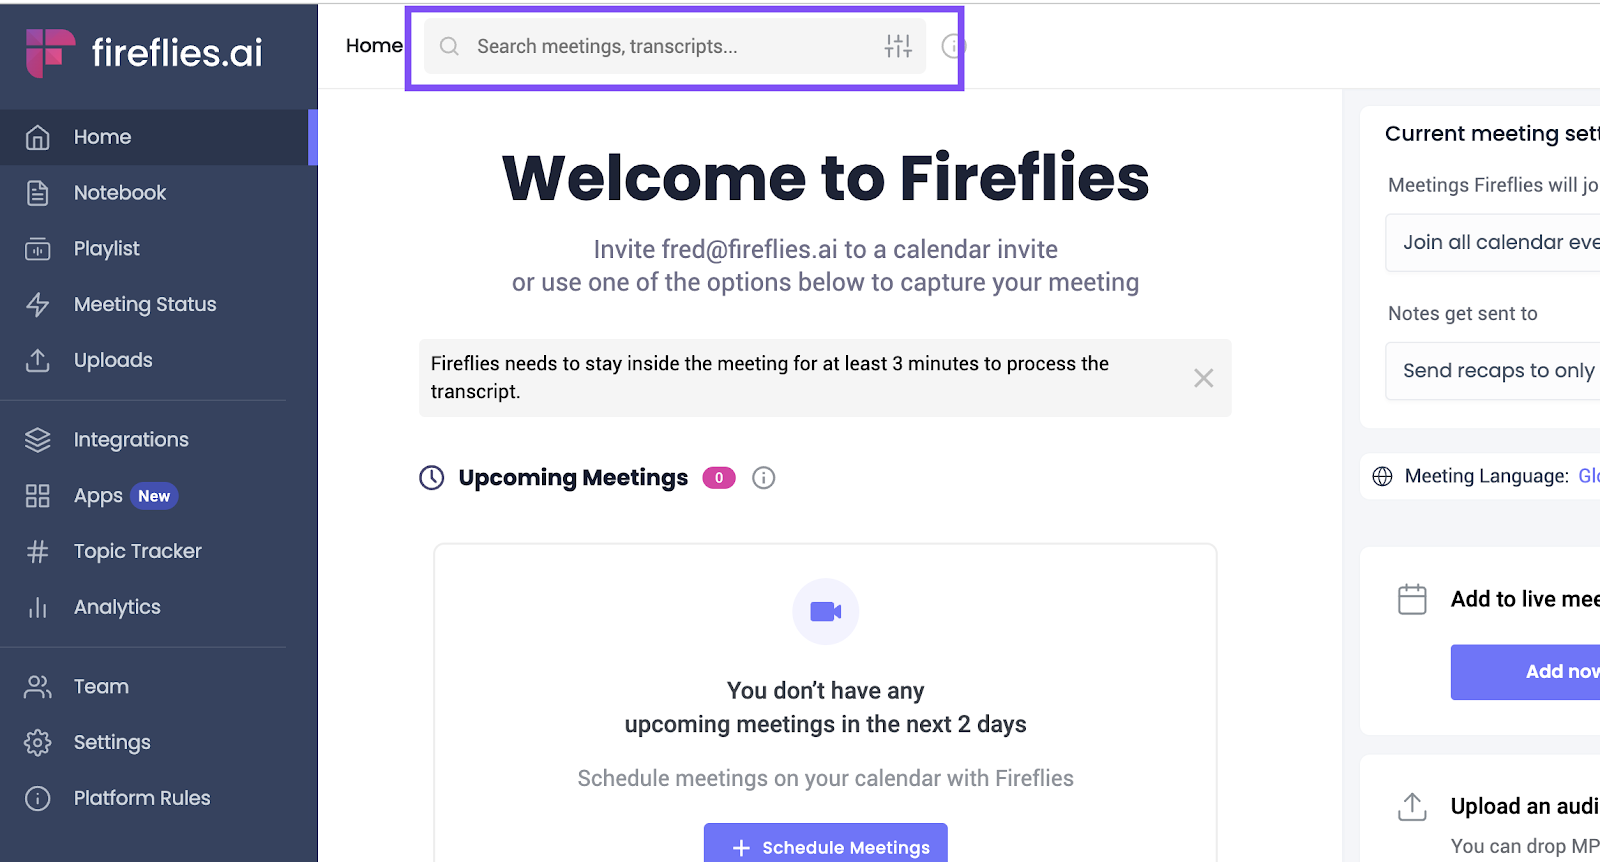 Fireflies Global Search feature